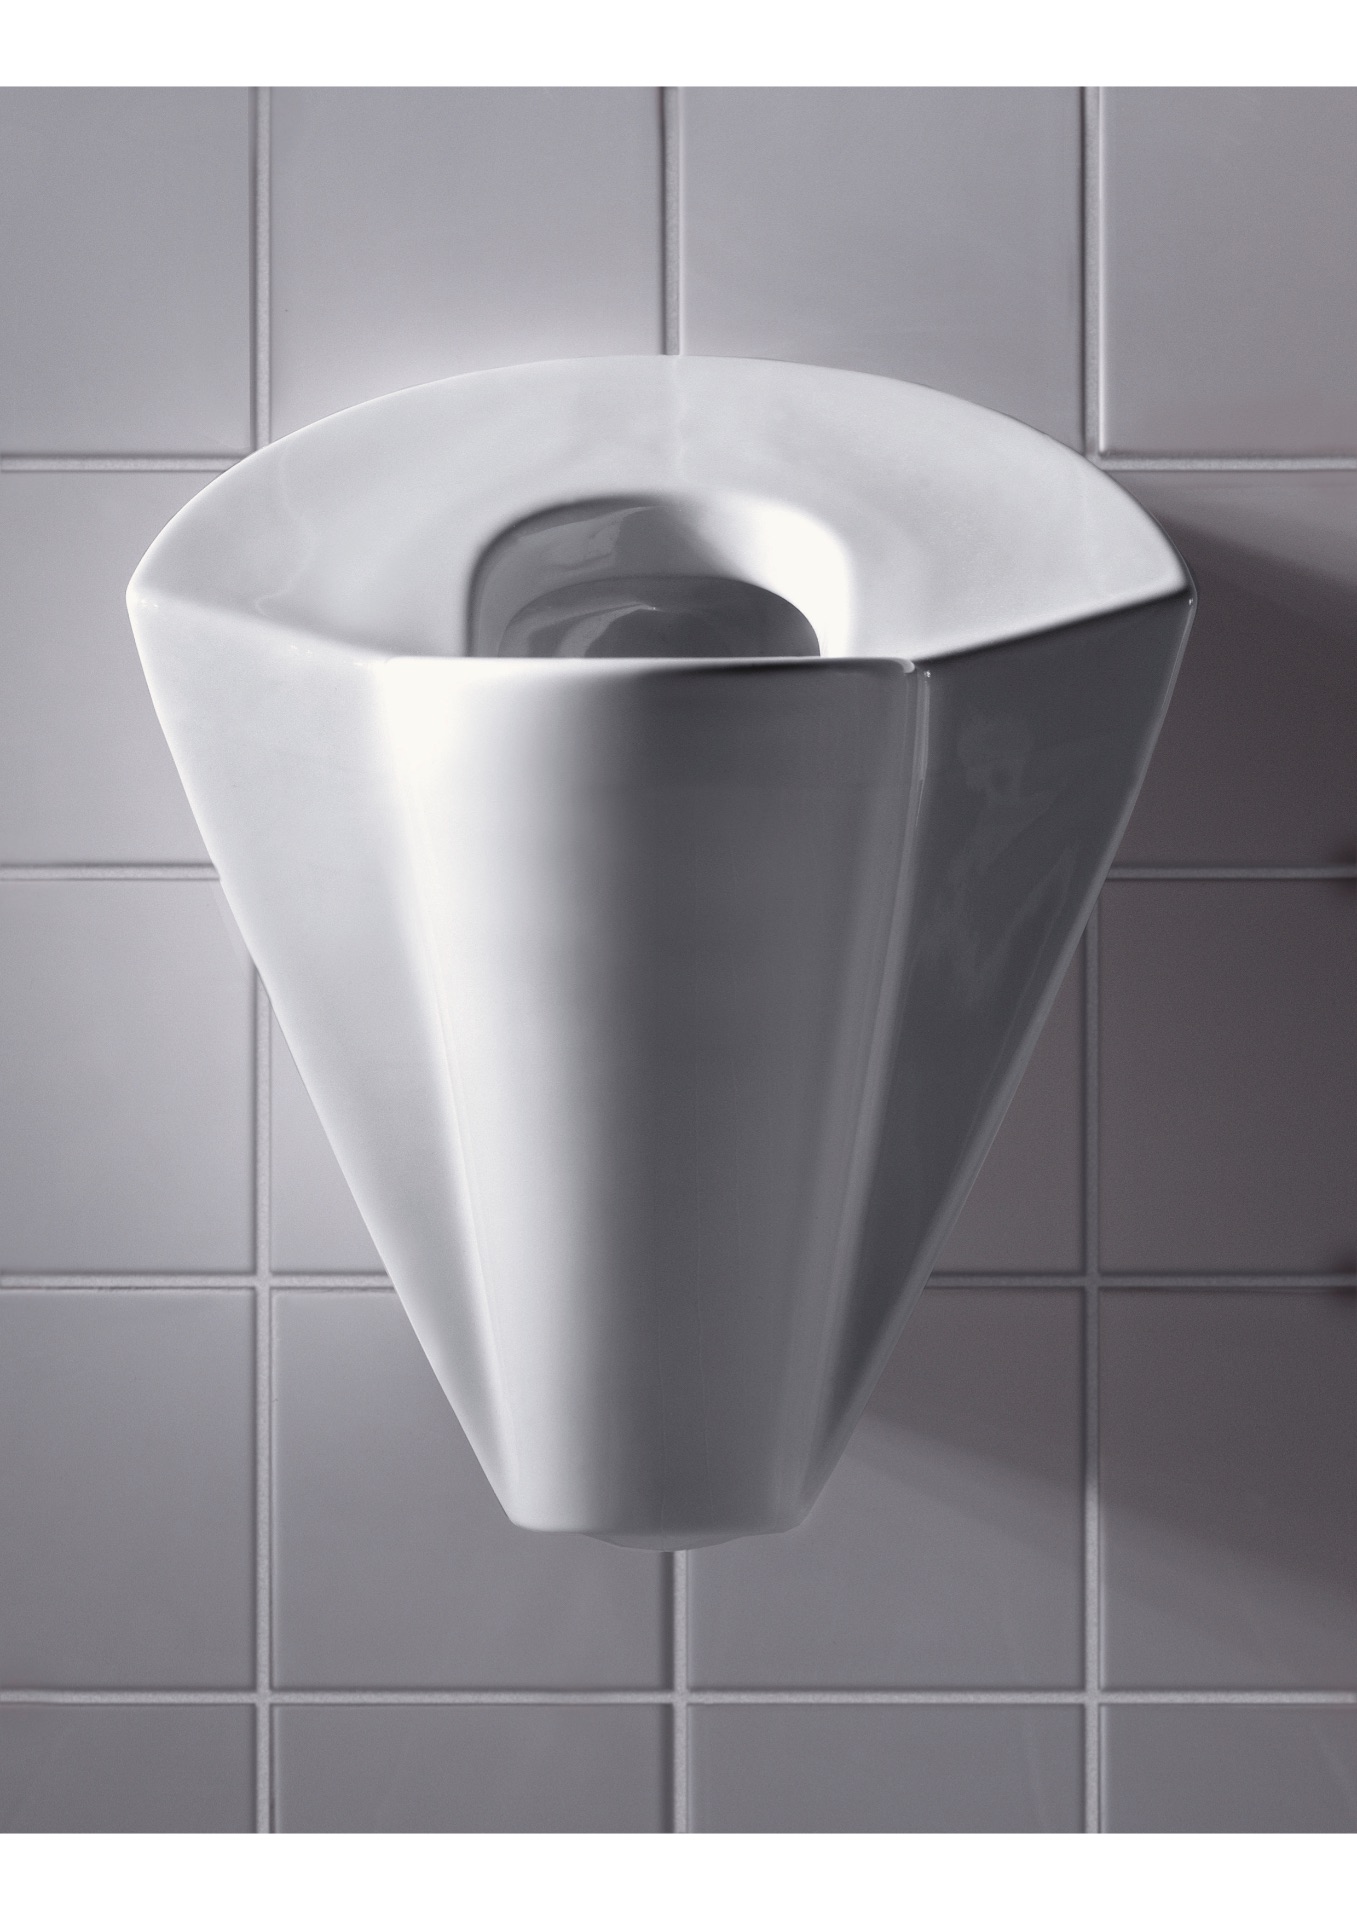 lady p female urinal in white ceramic on white tiled wall.